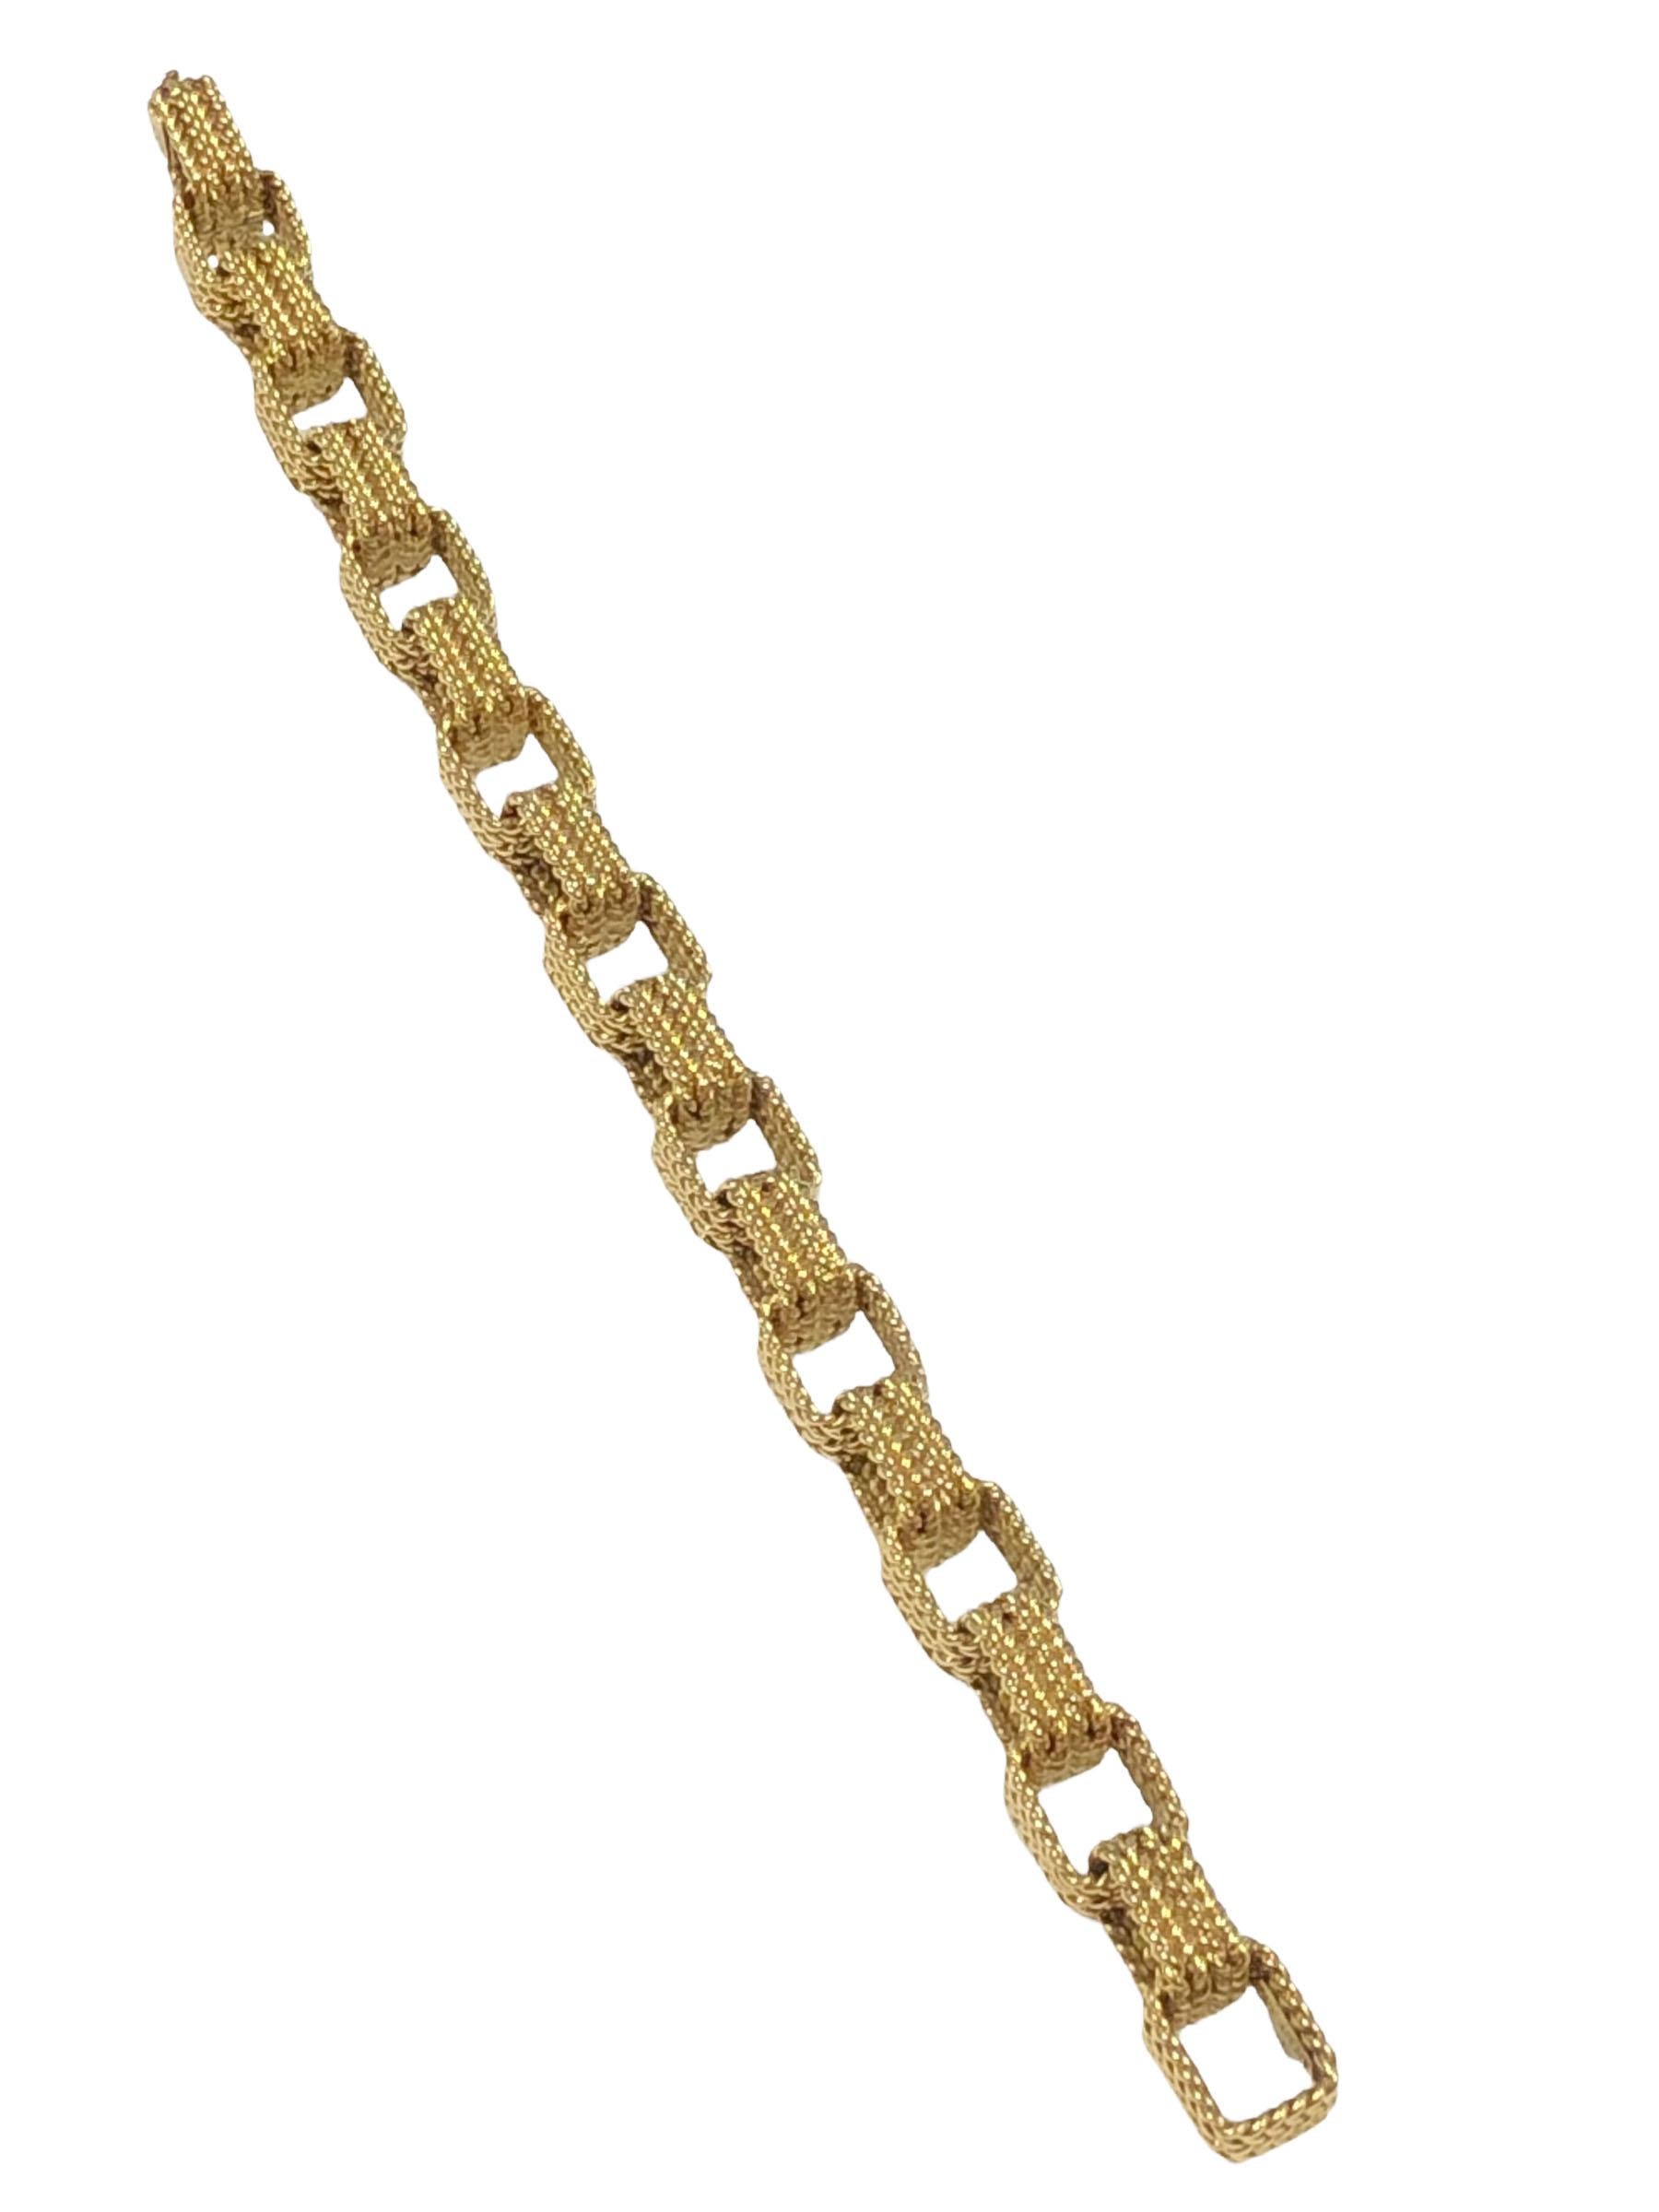 Circa 1960s Tiffany & Company 18k Yellow Gold Box Link Bracelet, measuring 8 inches in length 3/16 inch wide and weighing 60.4 Grams. Each link is comprised of 2 double row twisted rope wire. 